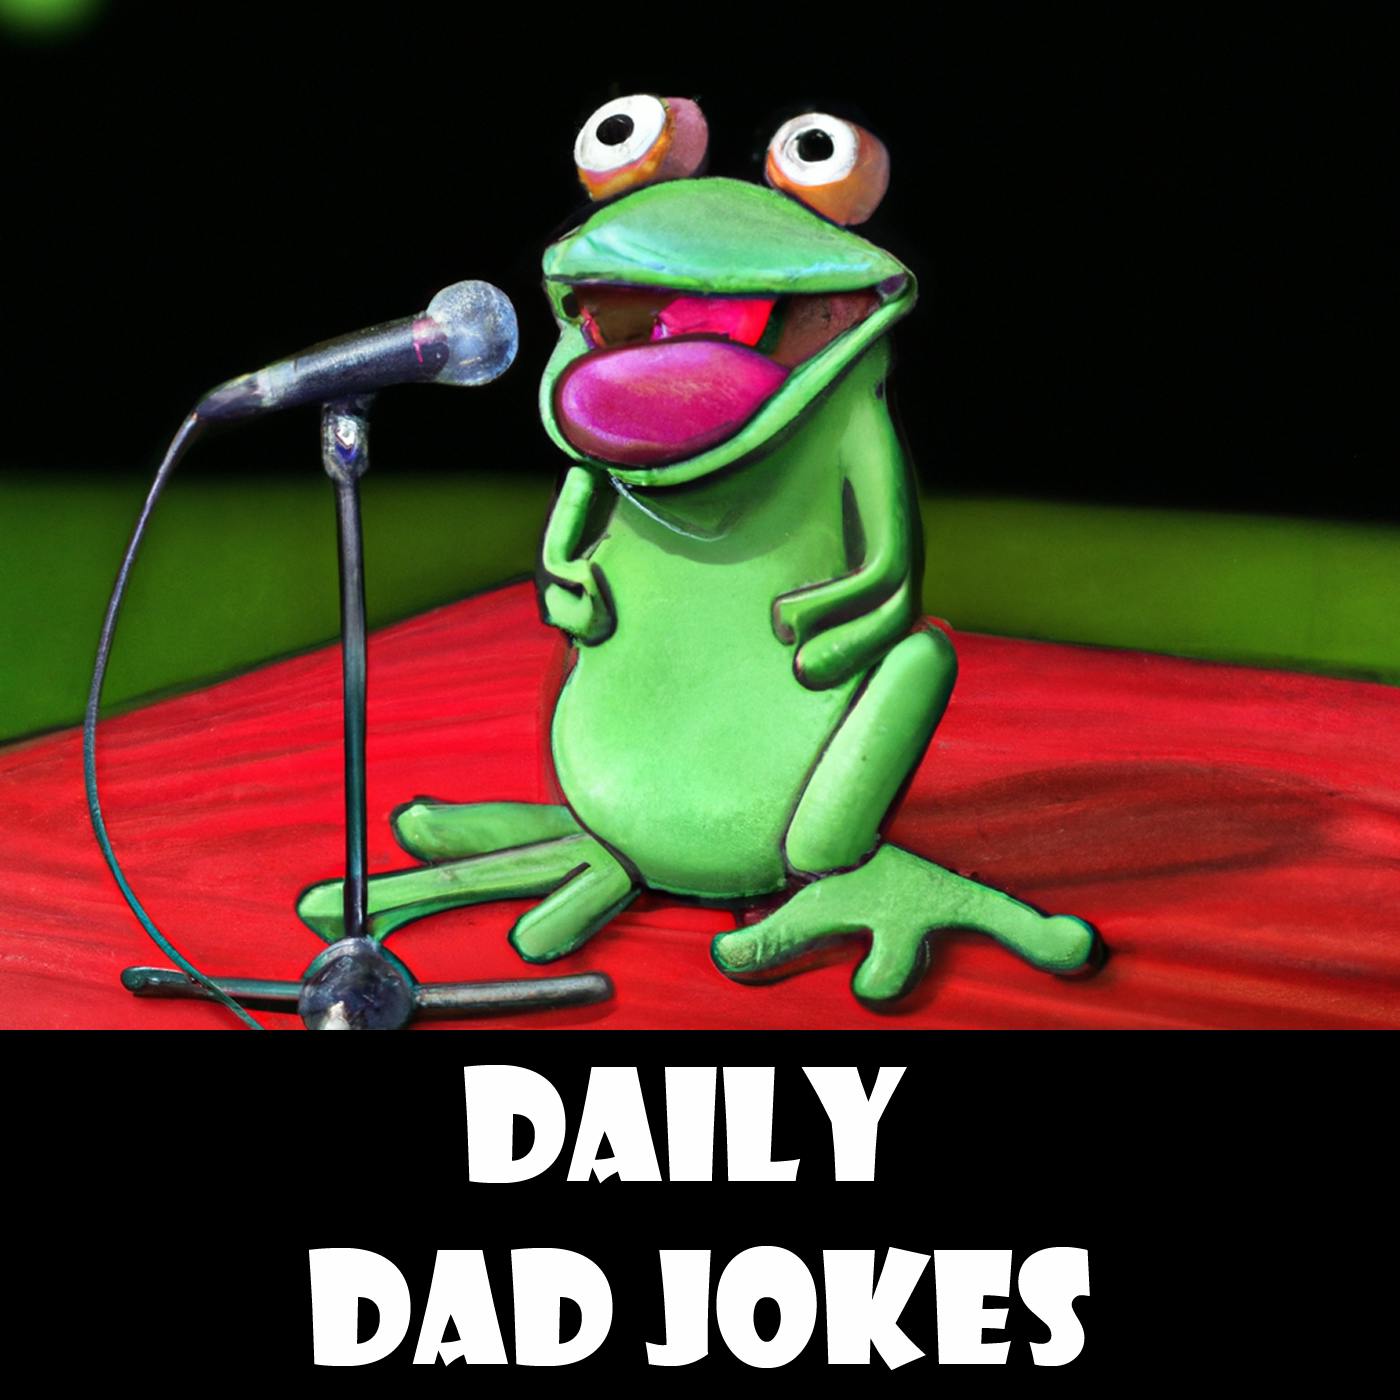 Dissecting comedy is like dissecting a frog. | + 16 more jokes | 25 Nov 2022